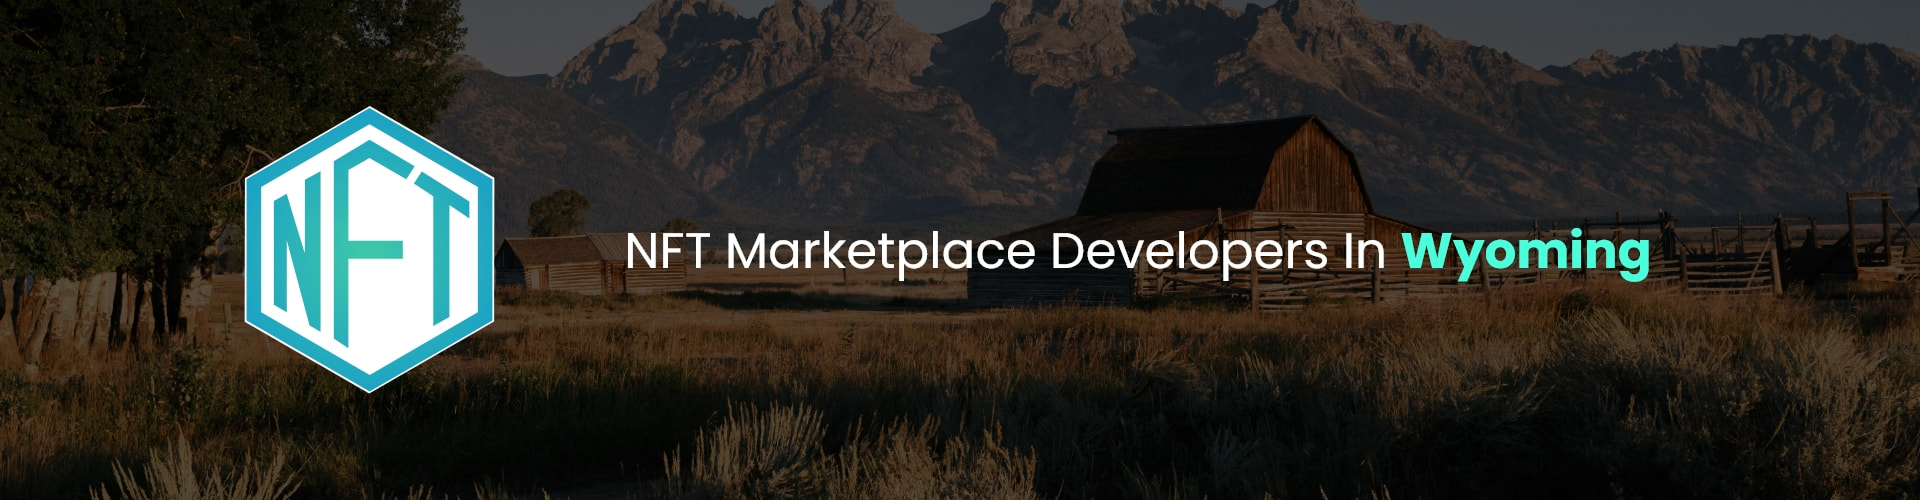 hire nft marketplace developers in wyoming